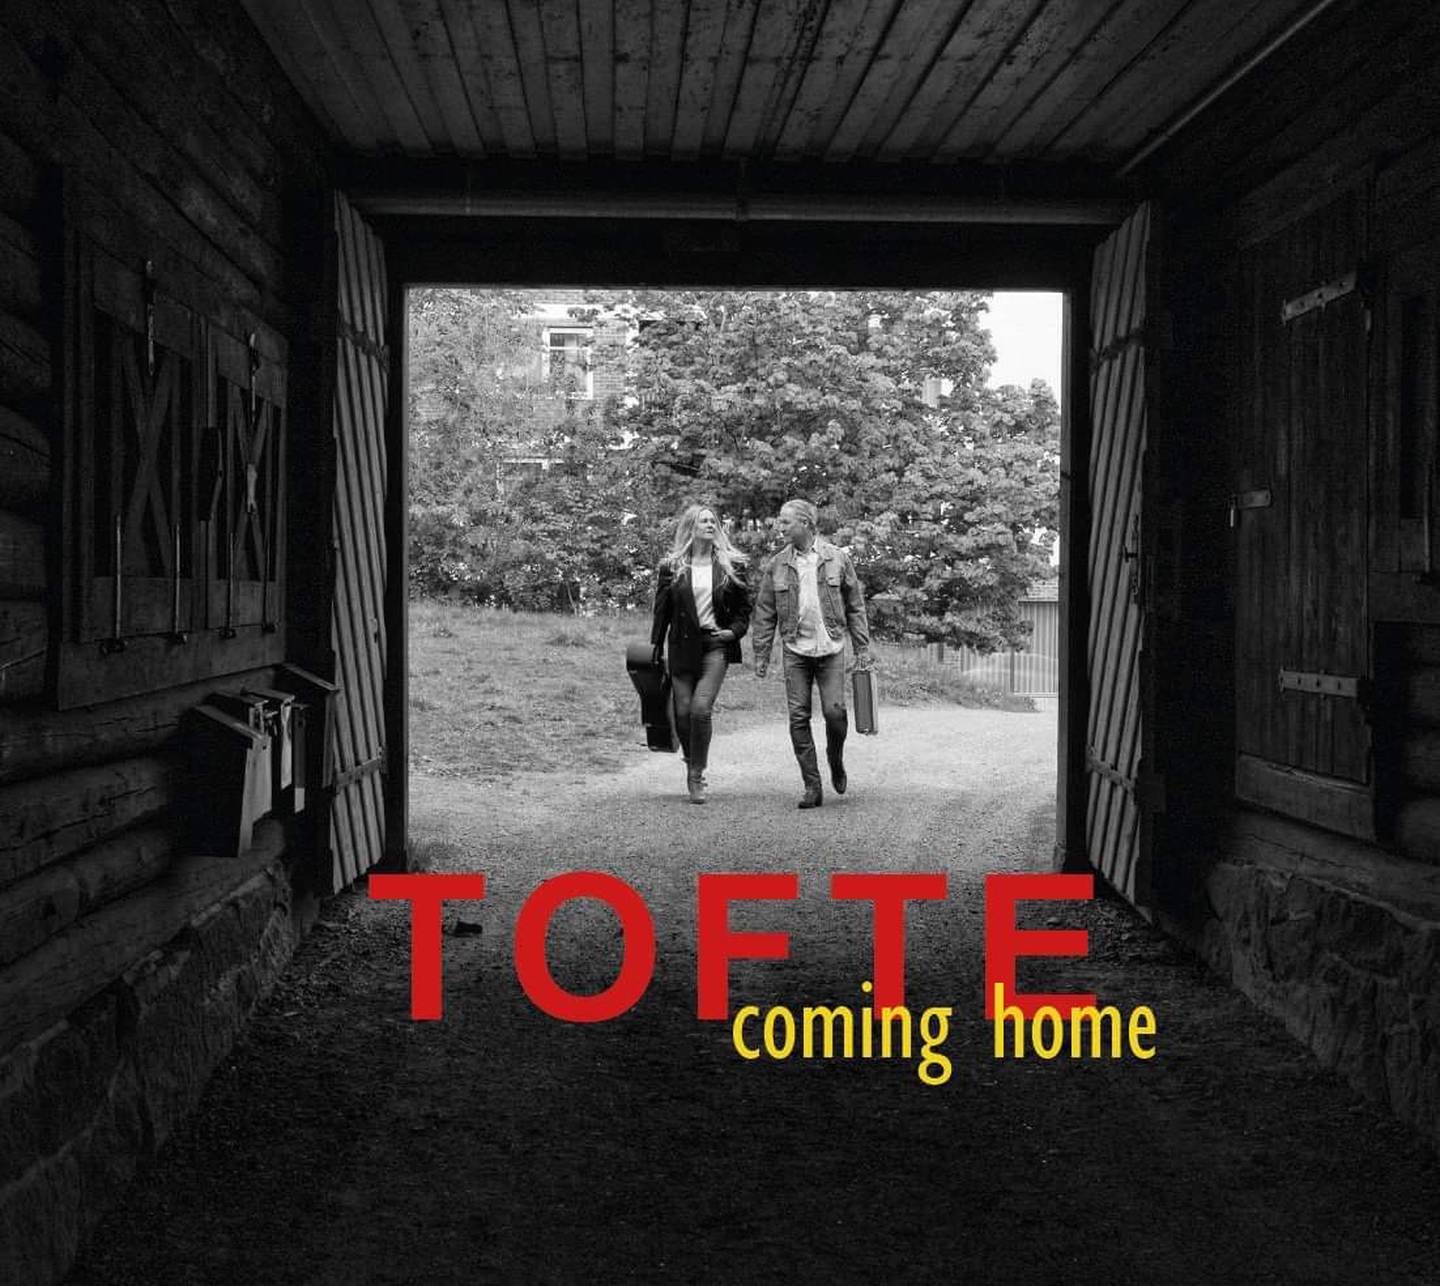 Tofte, Coming Home